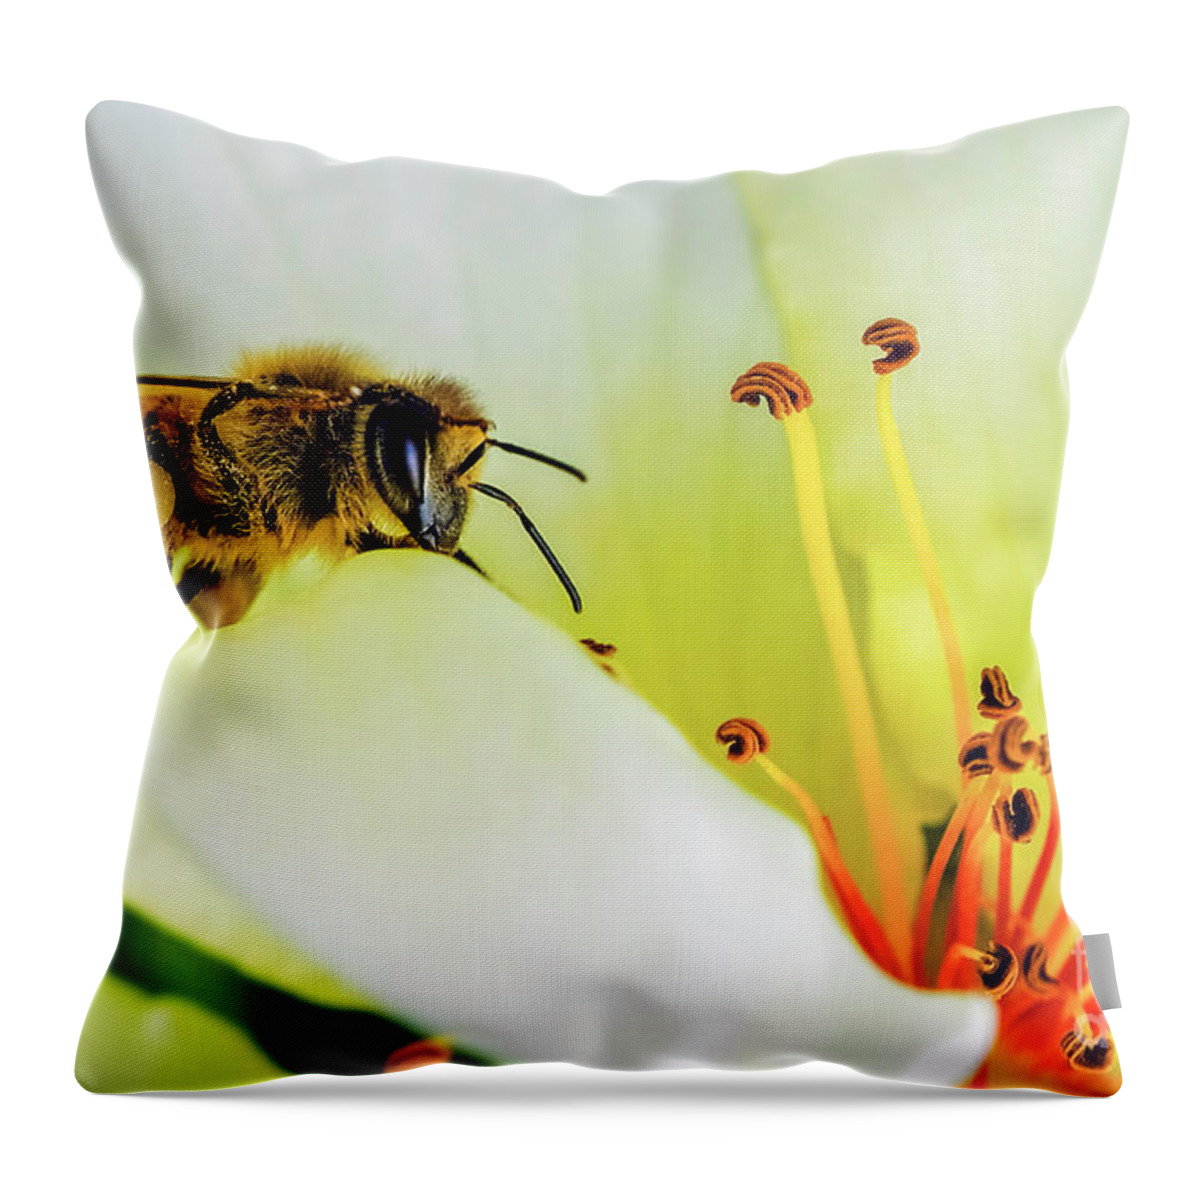 Bee Throw Pillow featuring the photograph Bee by Bill Frische